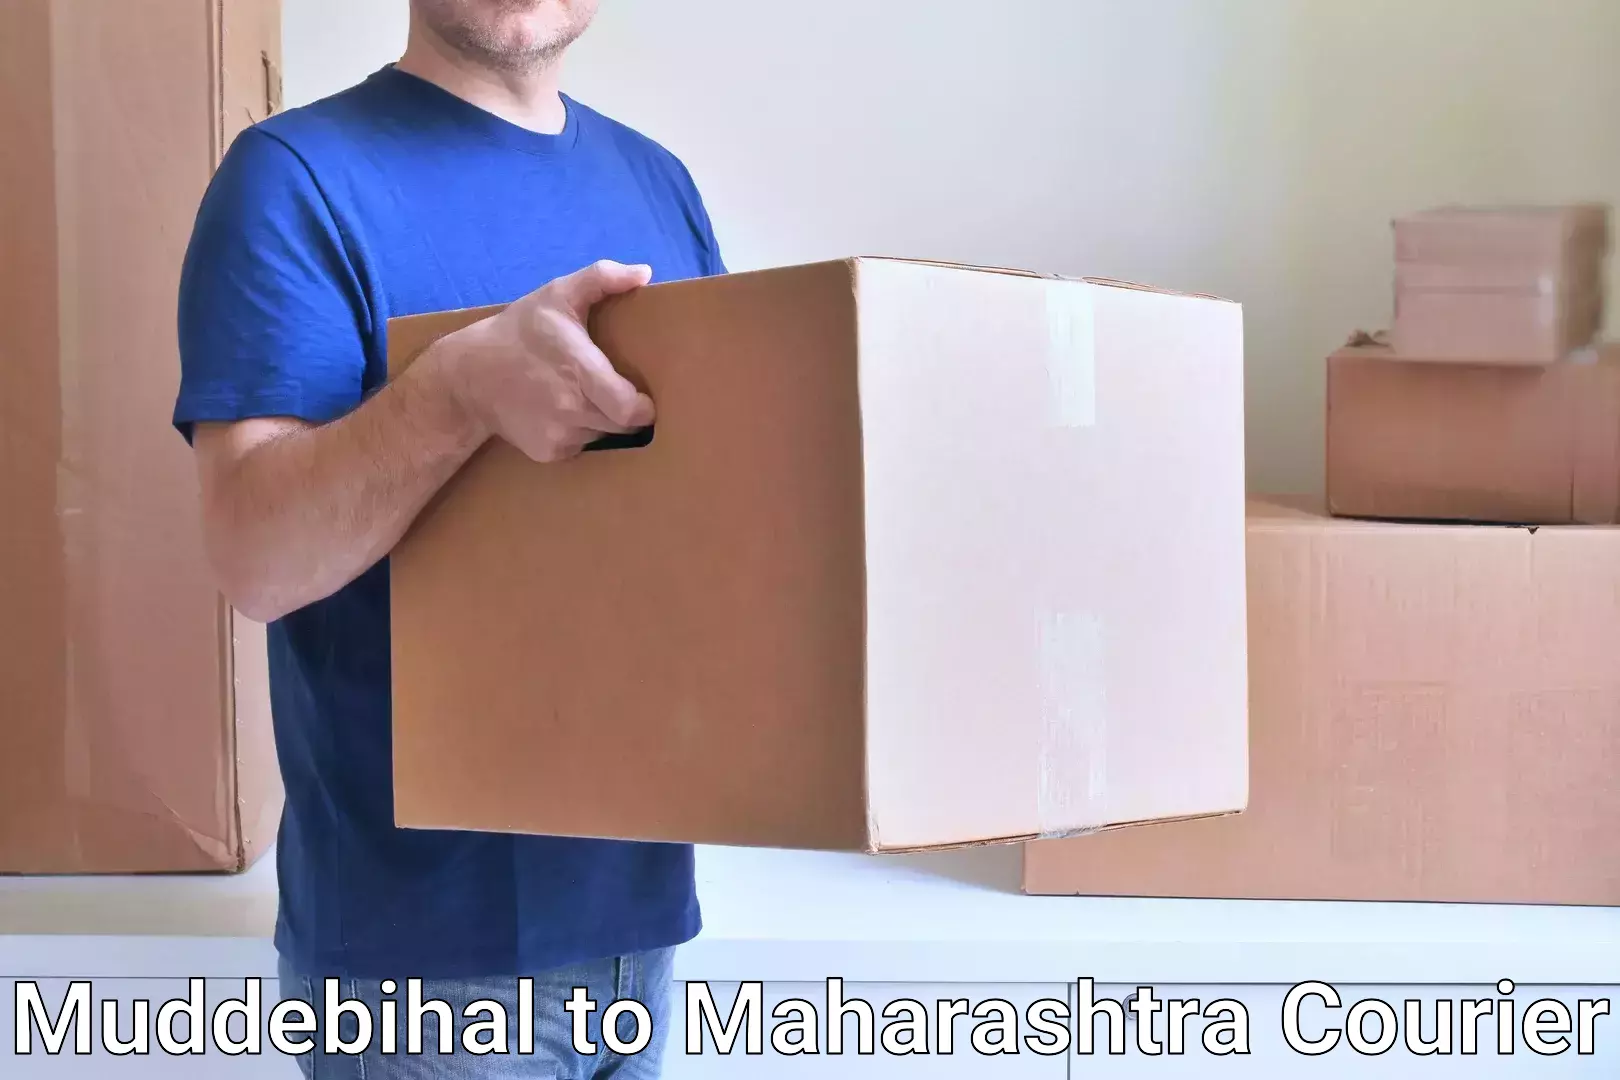 Same-day delivery options Muddebihal to Alephata